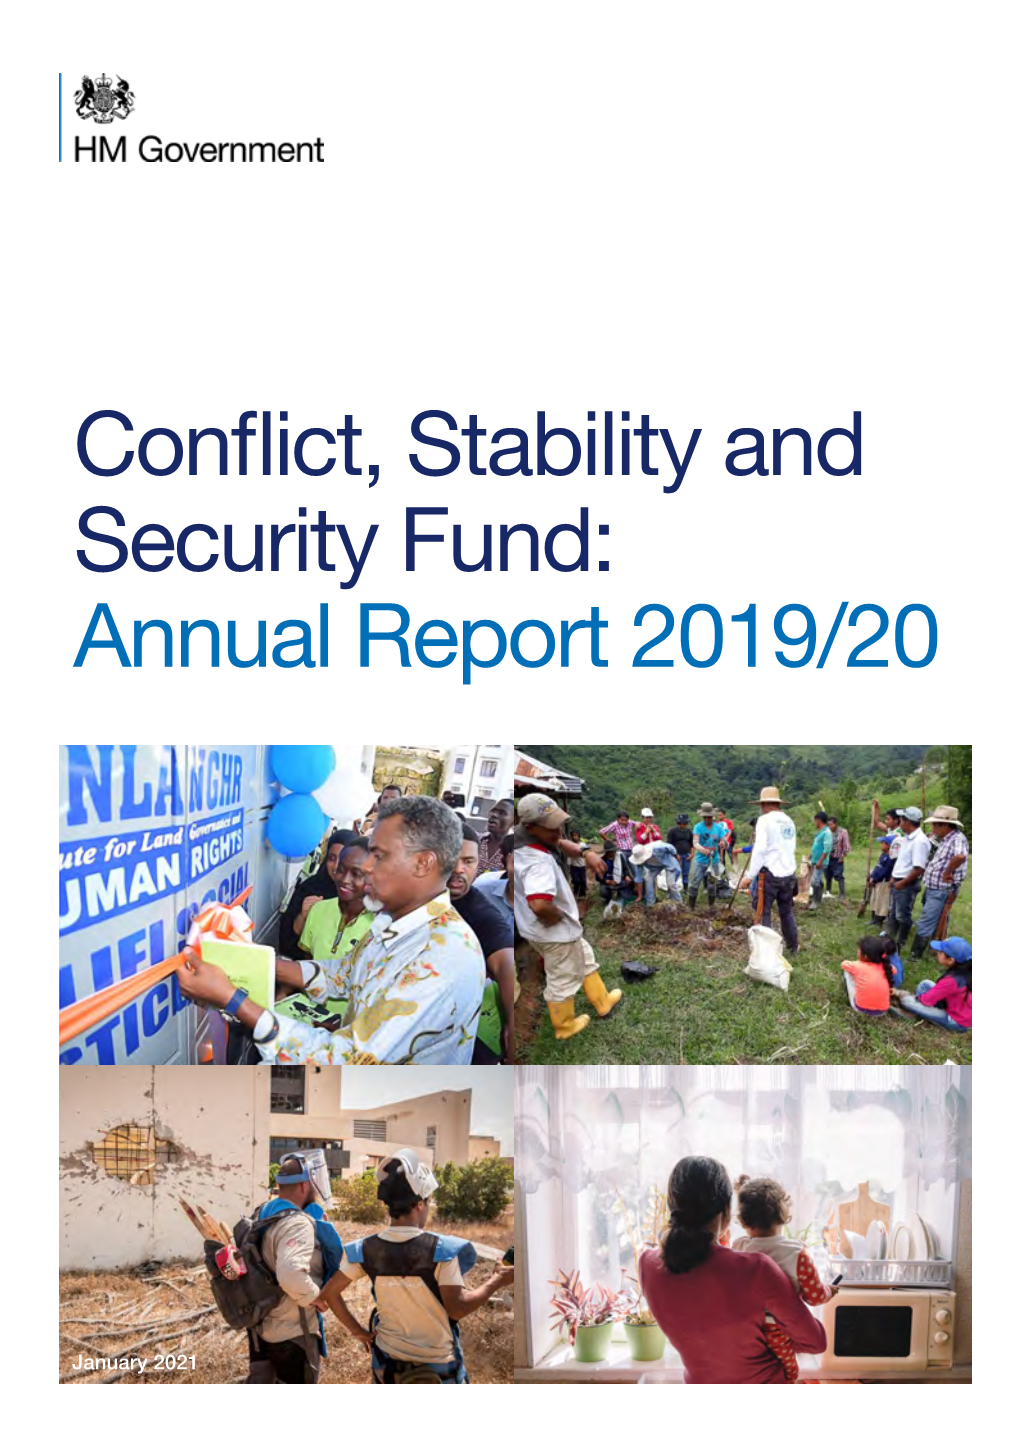 Conflict, Stability and Security Fund: Annual Report 2019/20